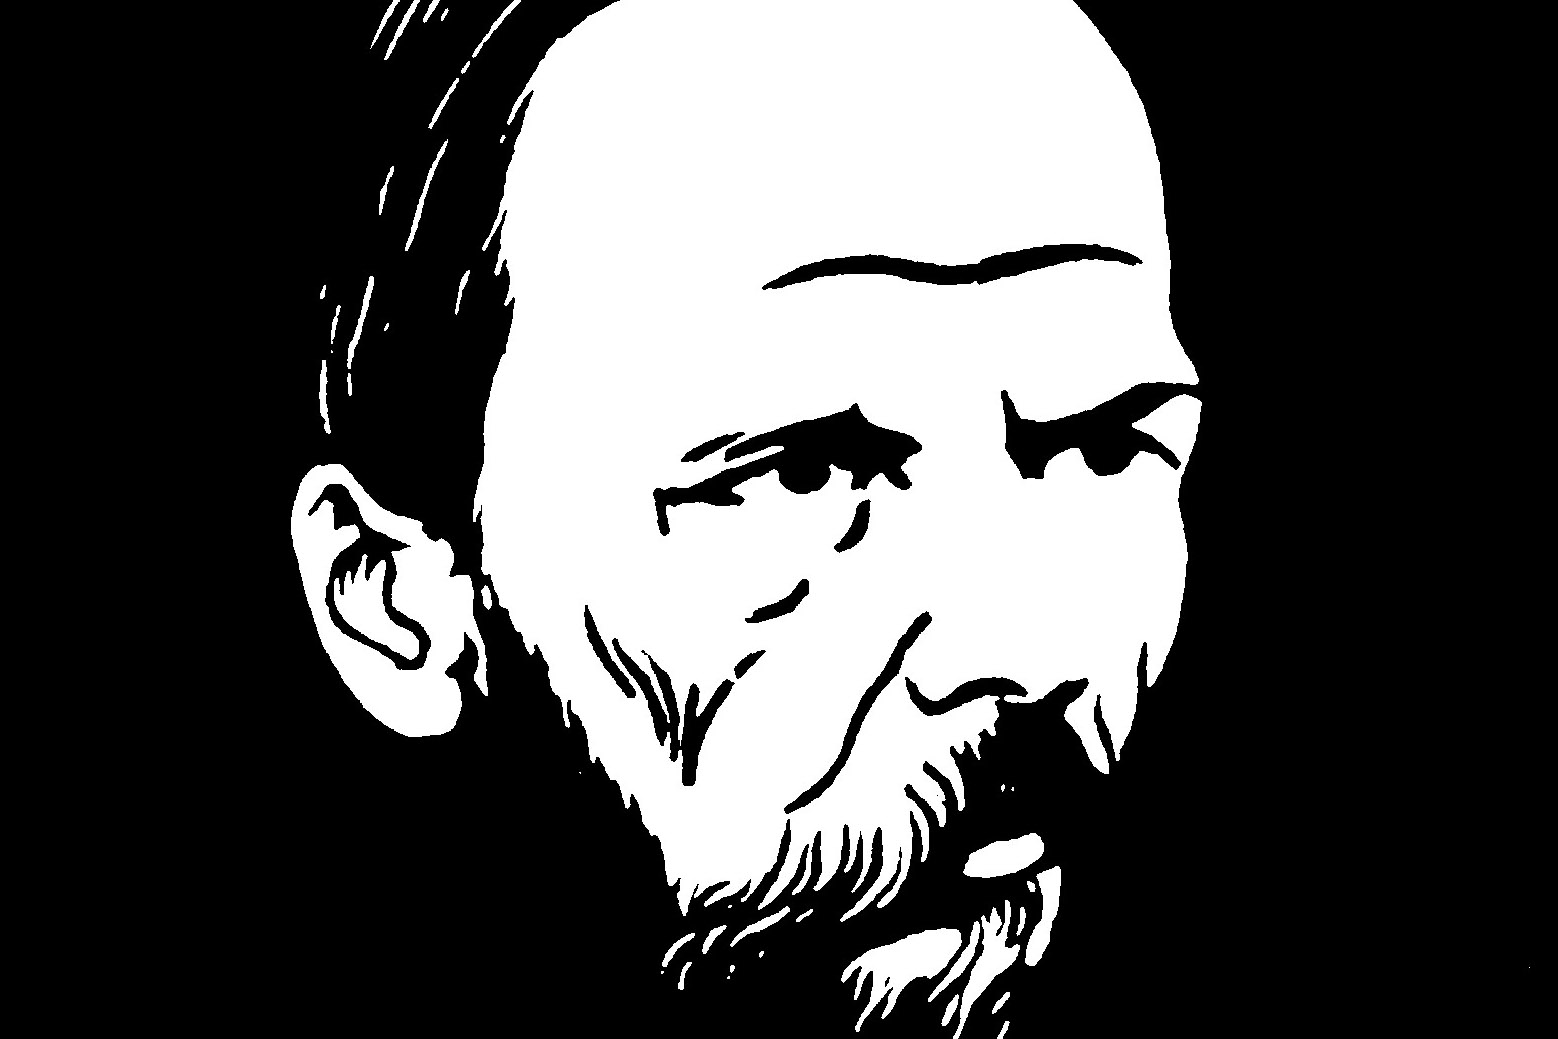 Dostoevsky and His Demons